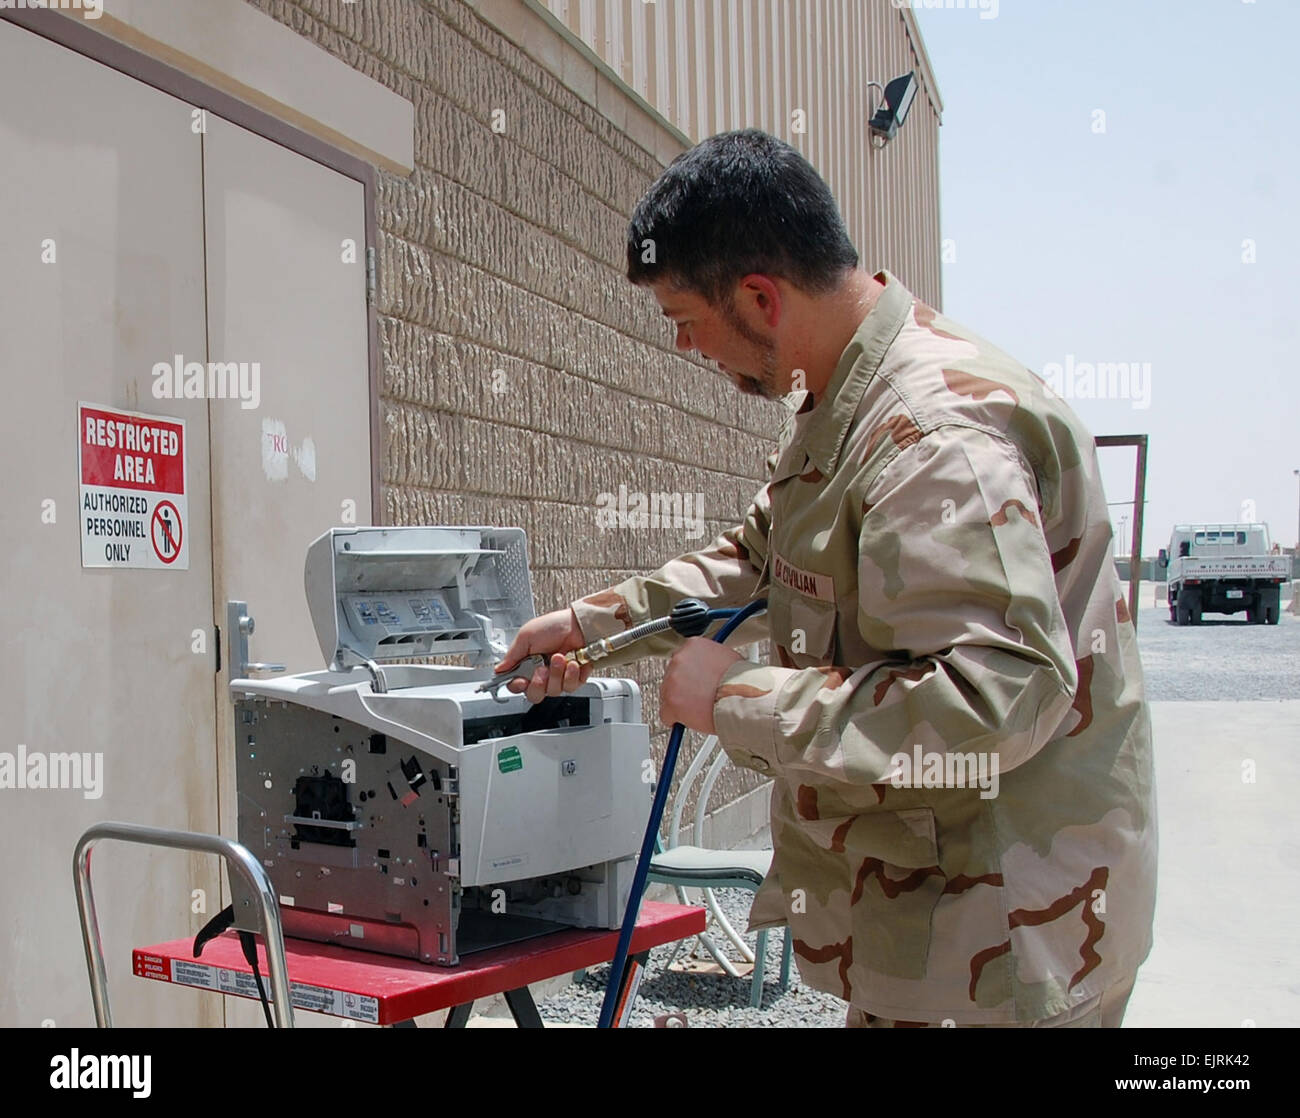 Computer technician Martin Barnoski, a deployed Department of the Army civilian, uses compressed air to clean a computer printer, June 24, 2008, at Camp Arifjan, Kuwait.  Barnoski is a member of the U.S. Army Communications-Electronics Command Life Cycle Management Command Forward Repair Activity in Kuwait. Known as the &quot;Tobyhanna FRA,&quot; the volunteer team from Tobyhanna Army Depot, Pa., provides maintenance support to units across Southwest Asia by servicing computers and associated peripheral devices. The FRA staff has serviced and repaired nearly 3,200 items this year.   Jim Hinnan Stock Photo